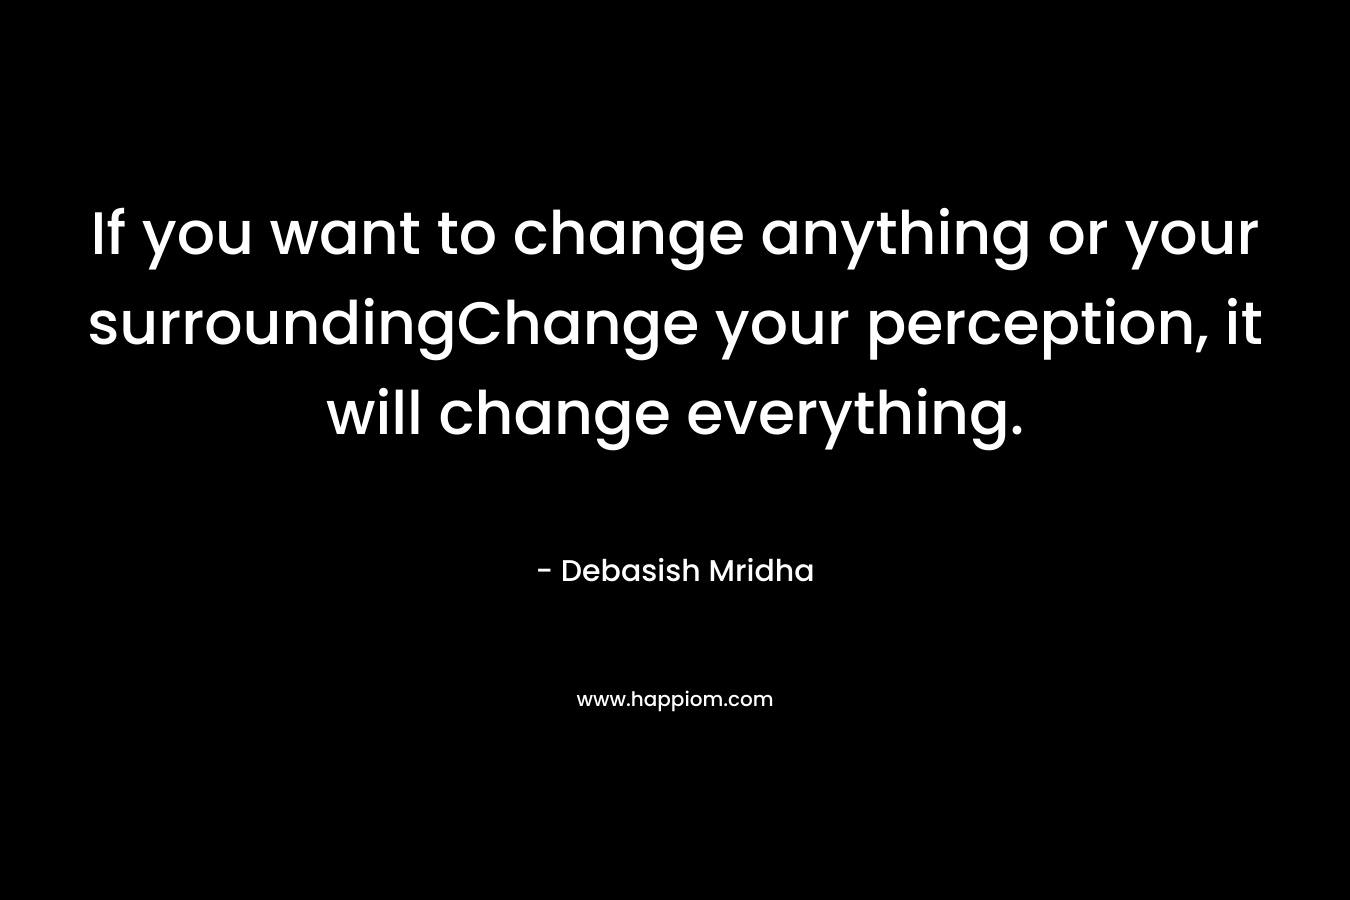 If you want to change anything or your surroundingChange your perception, it will change everything. – Debasish Mridha